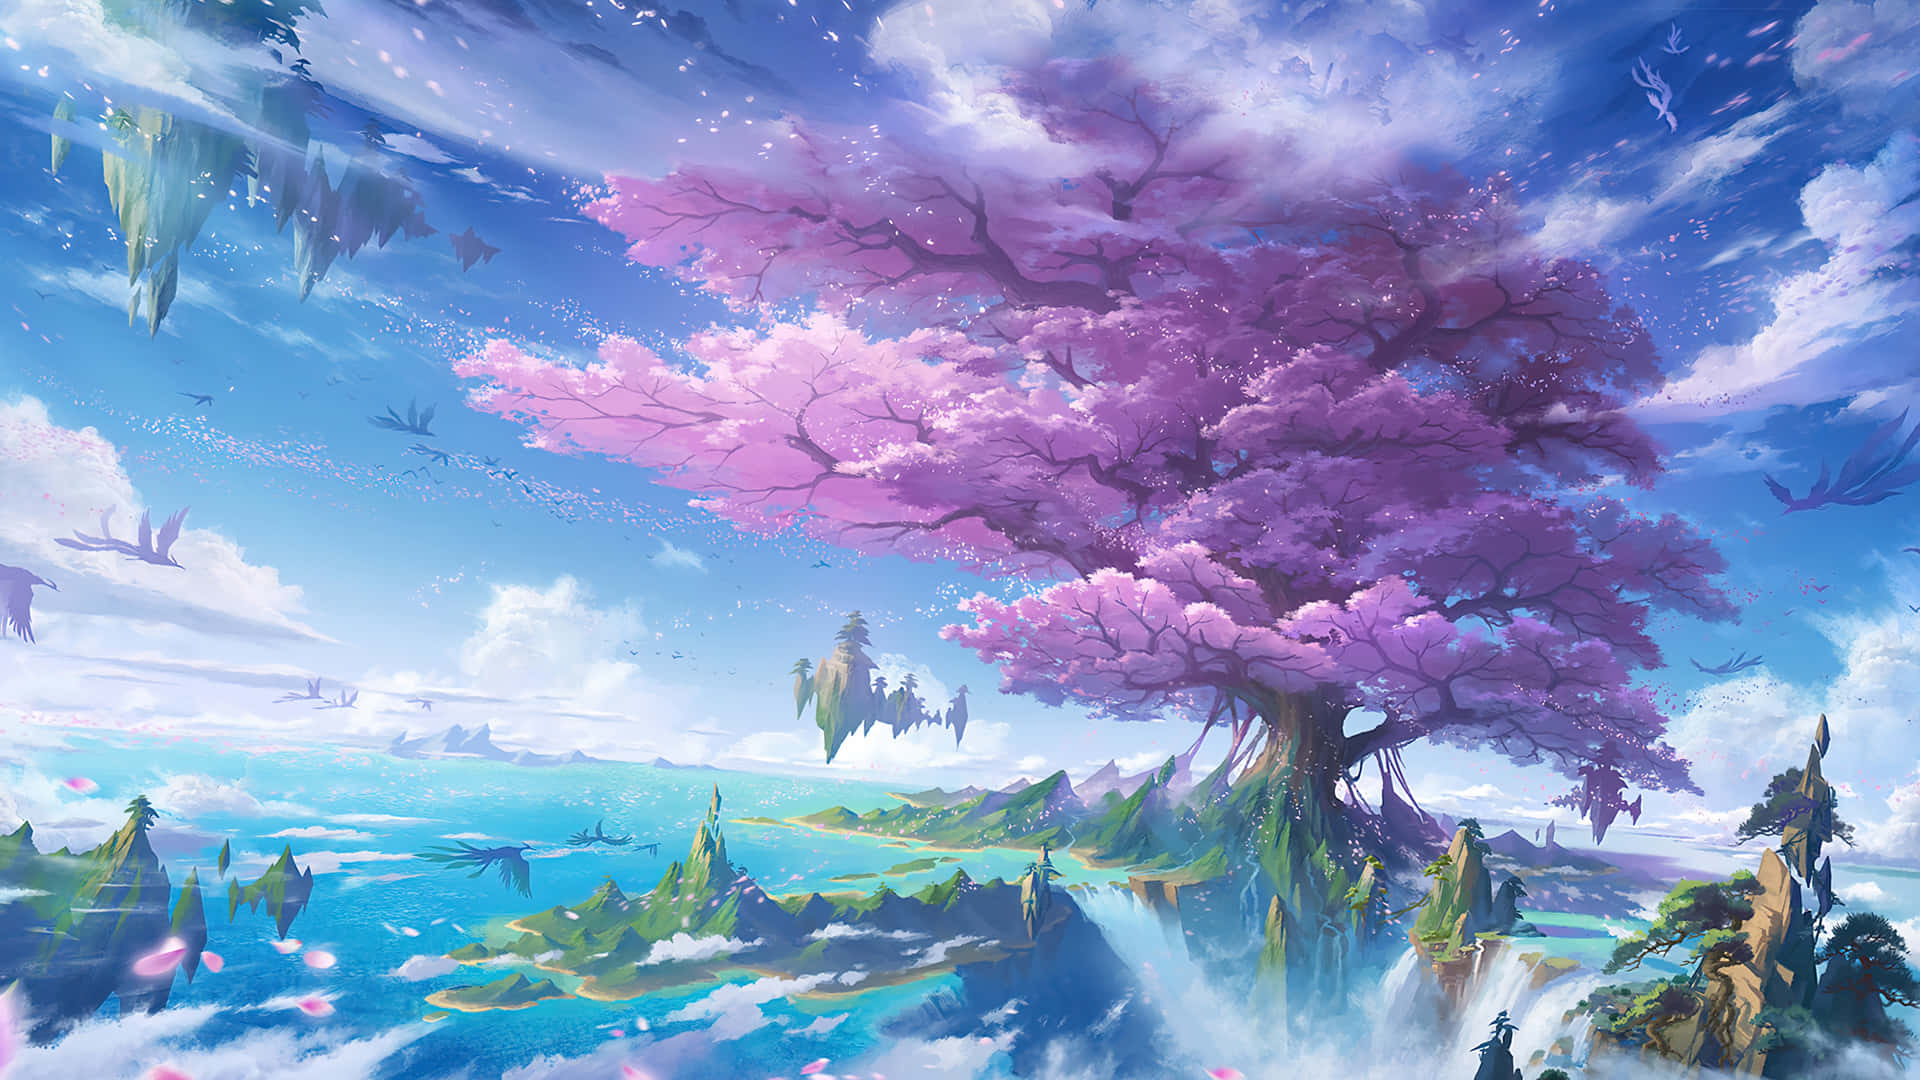 A Pink Tree On An Island With Clouds And Water